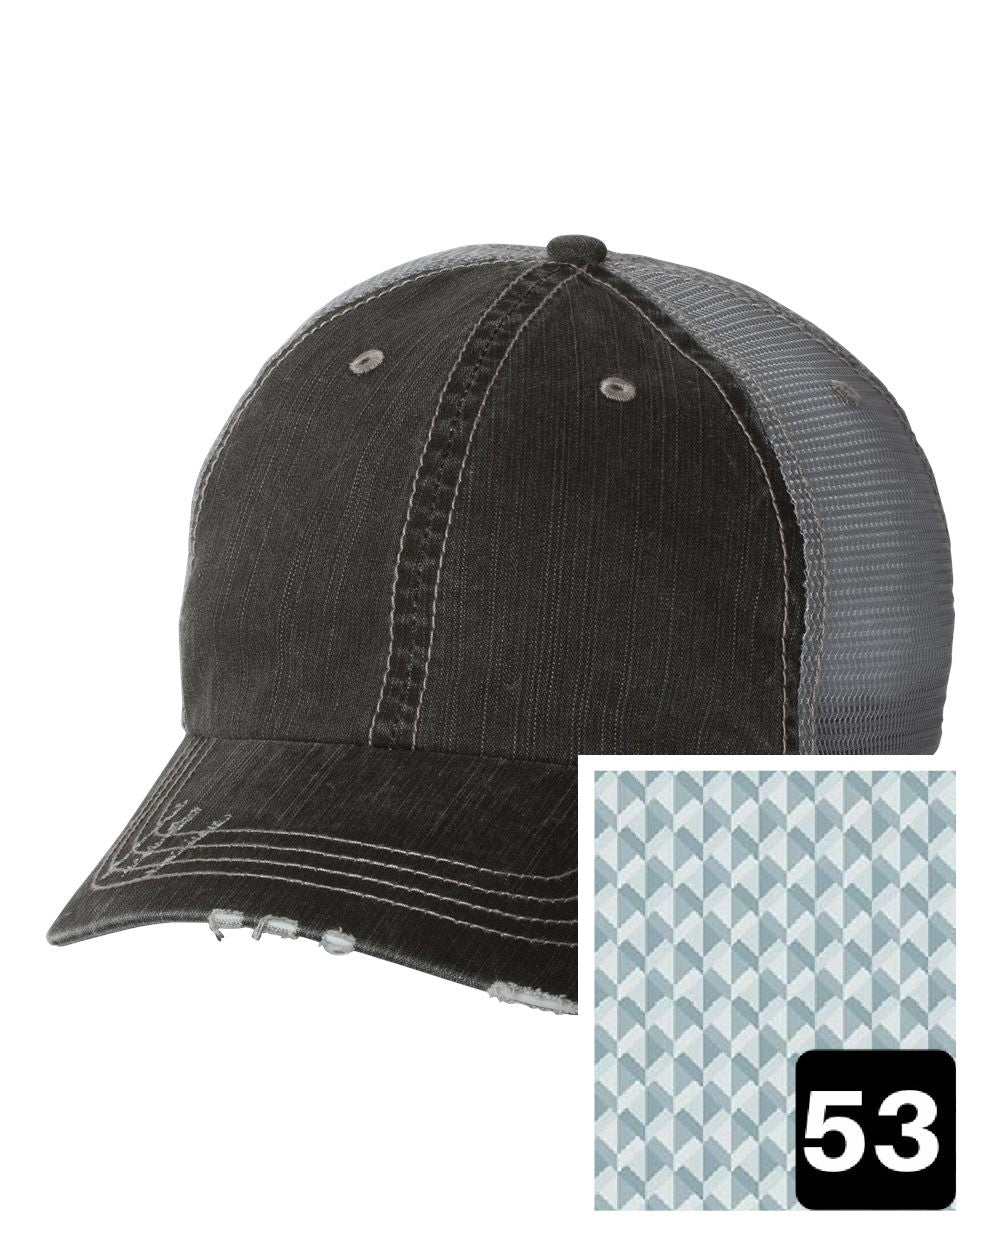 gray distressed trucker hat with multi-color stripe fabric state of Vermont